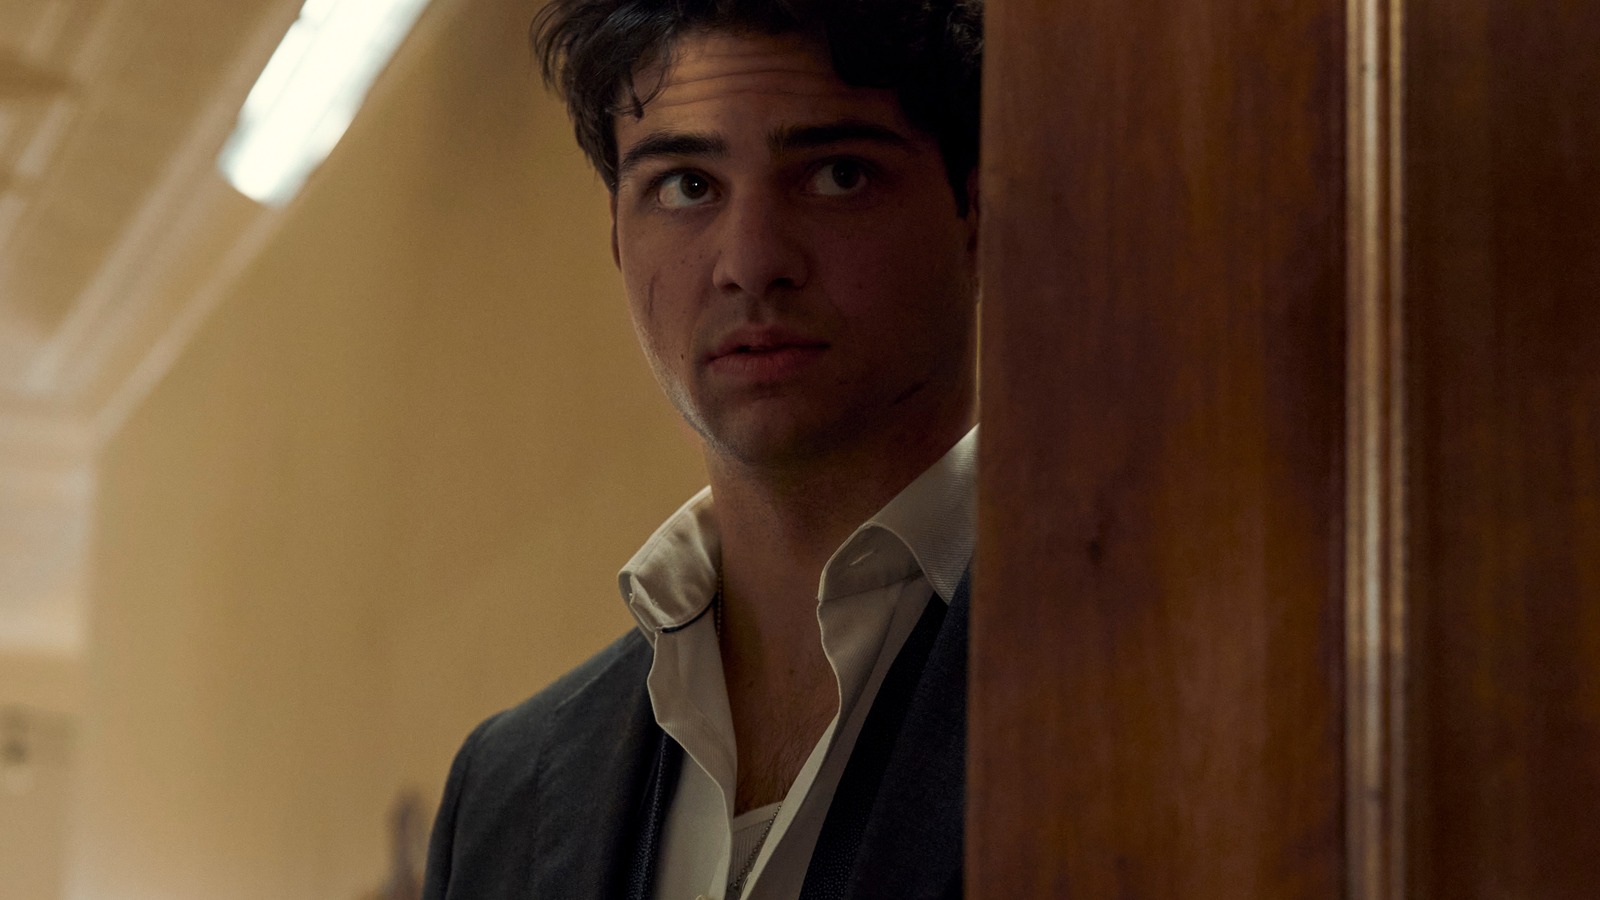 The Recruit Release Date, Cast, And More For Noah Centineo's New